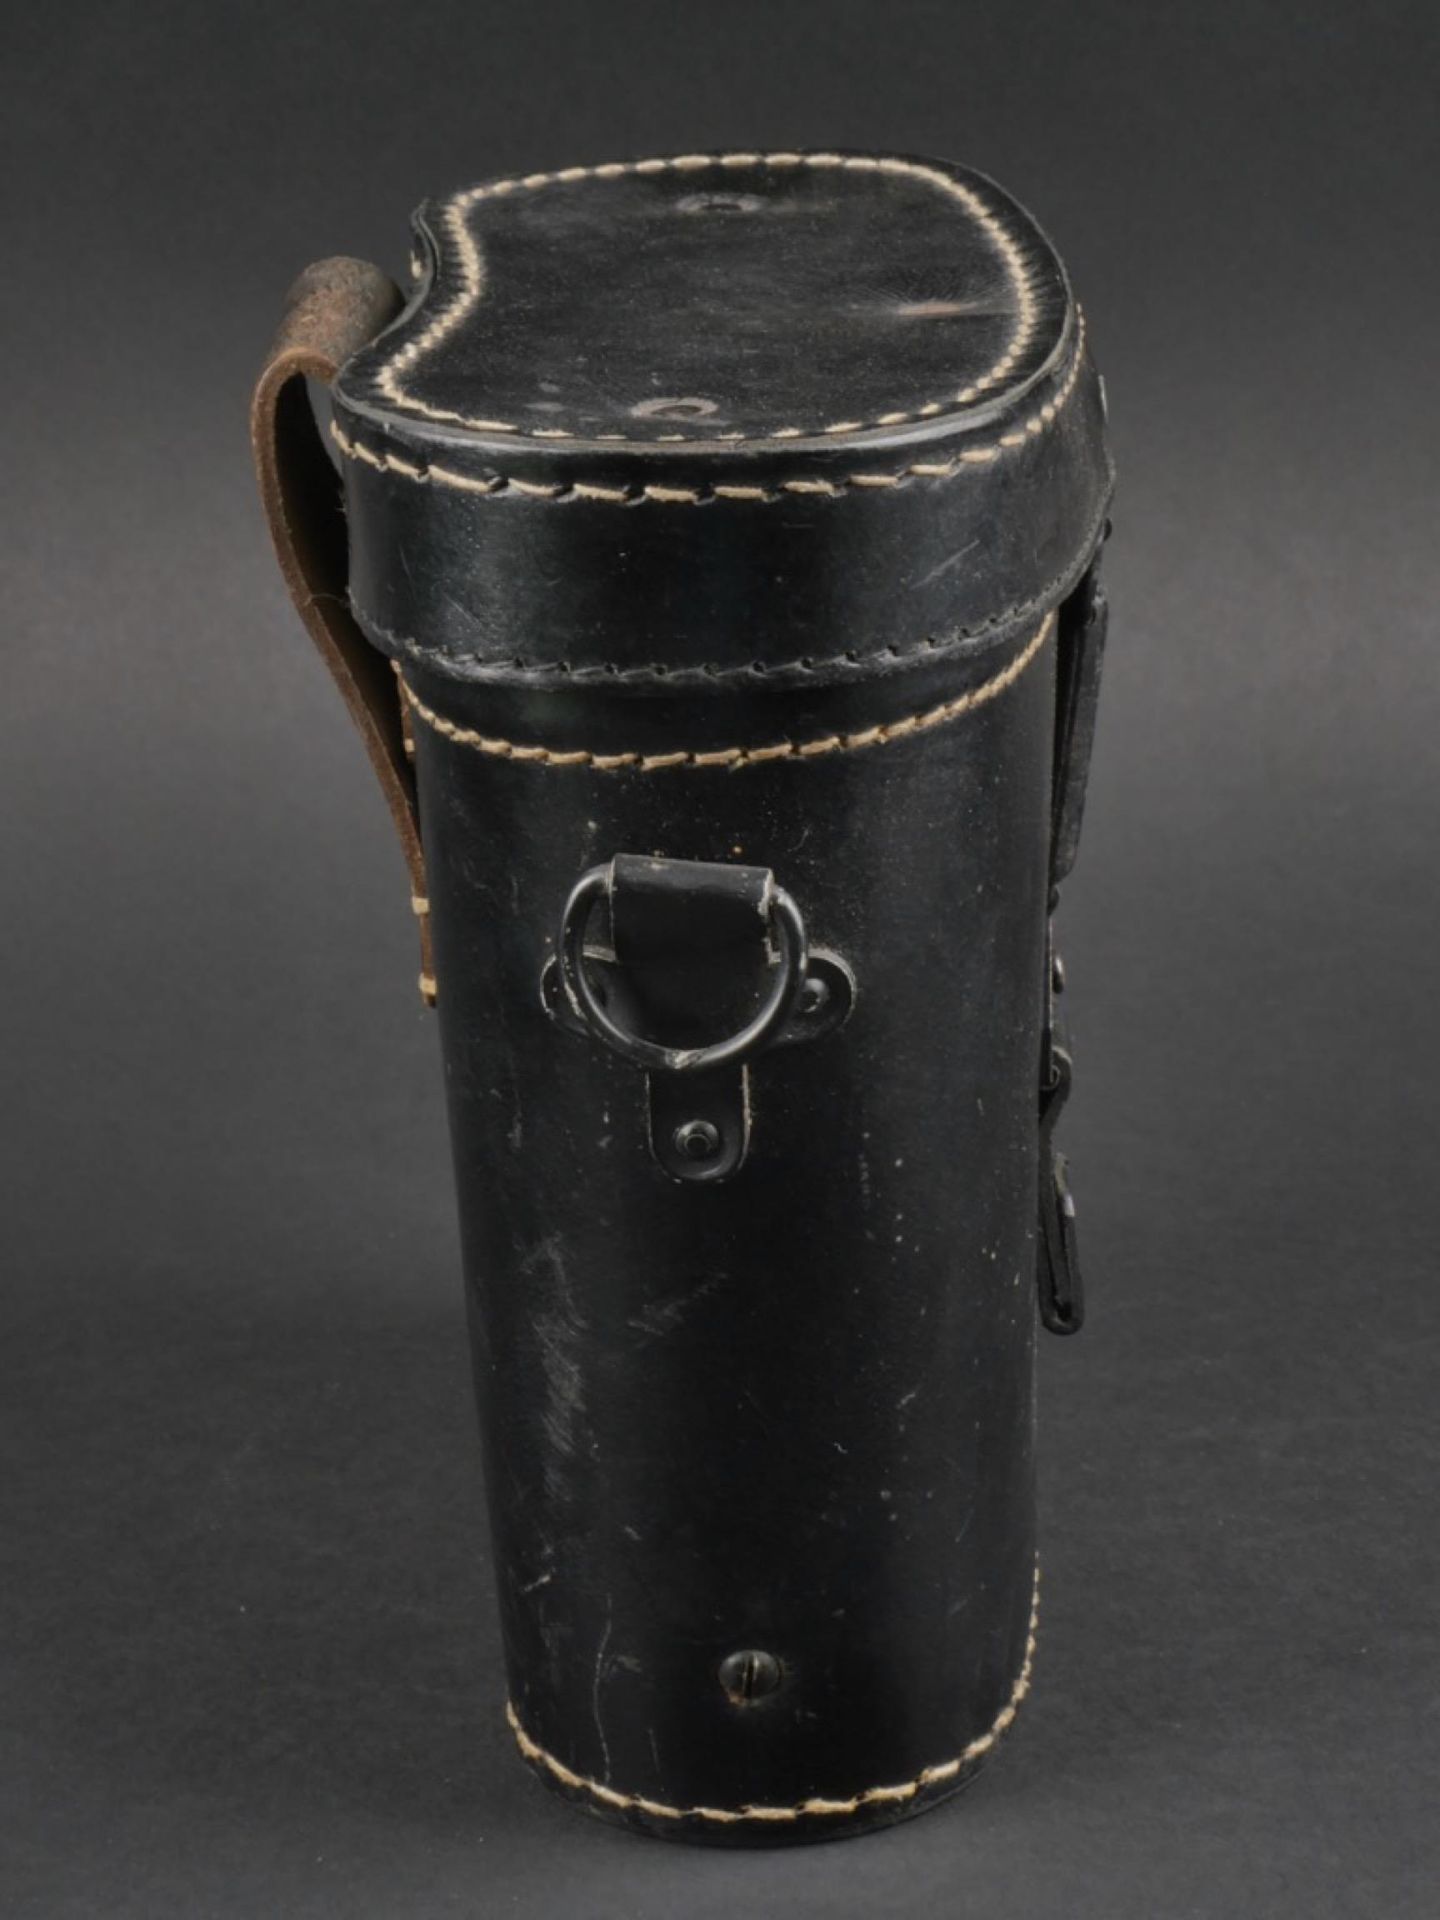 Housse pour jumelle. 
Binocular cover. - Image 5 of 10